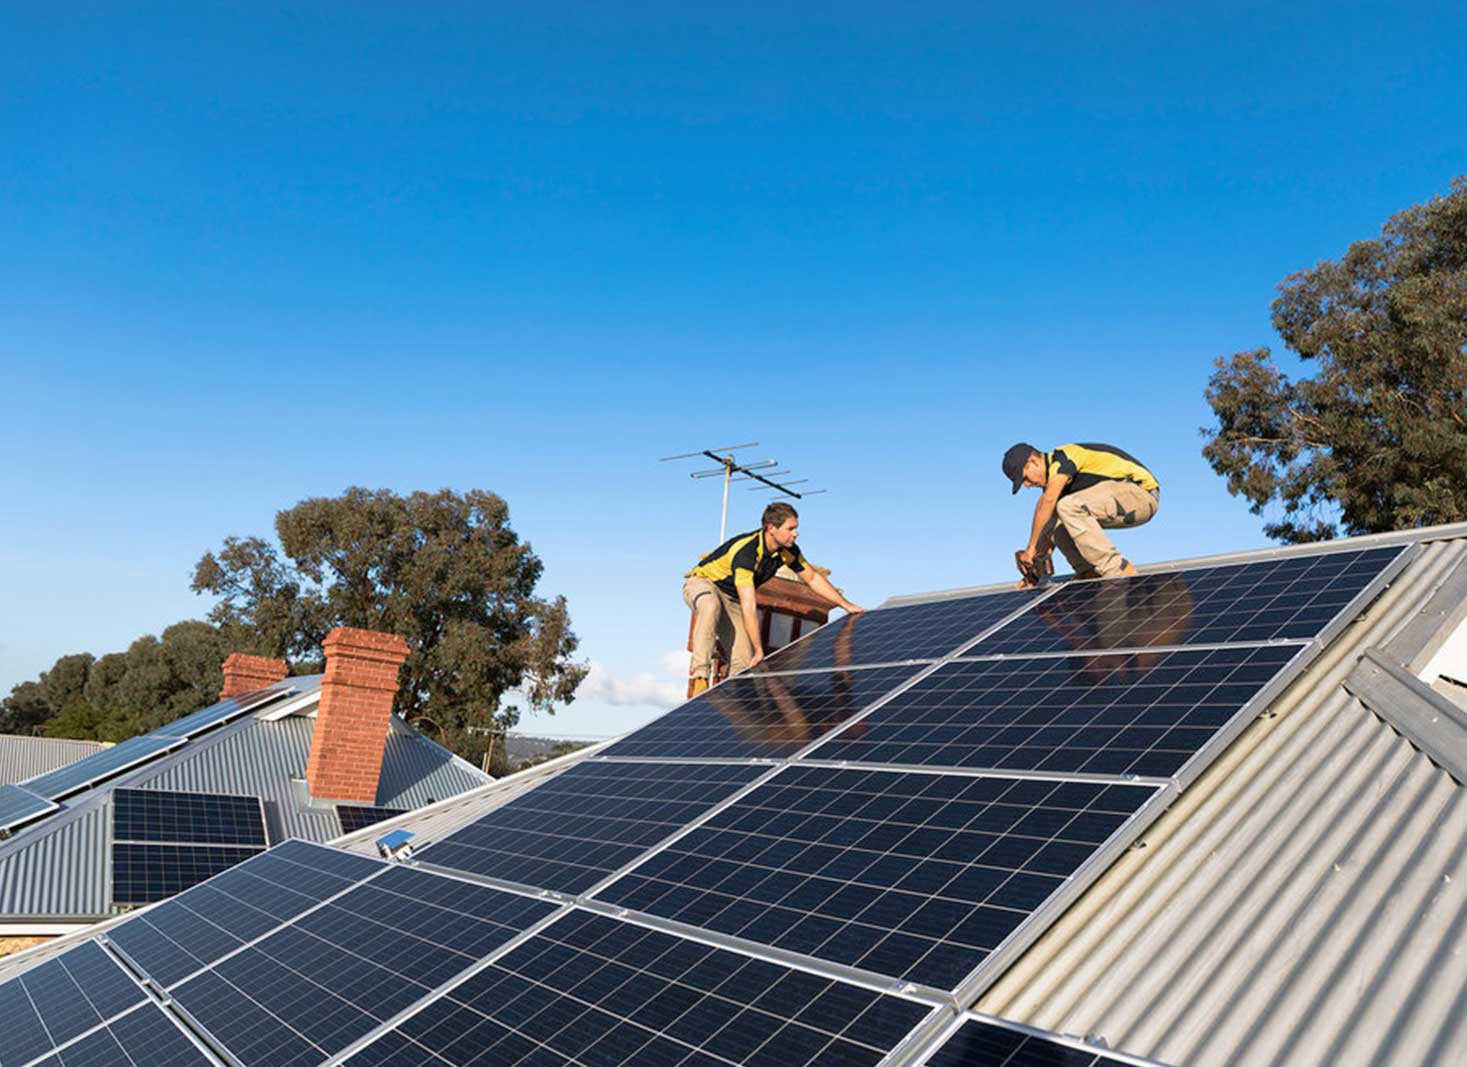 A picture of a solar panel installation in Australia